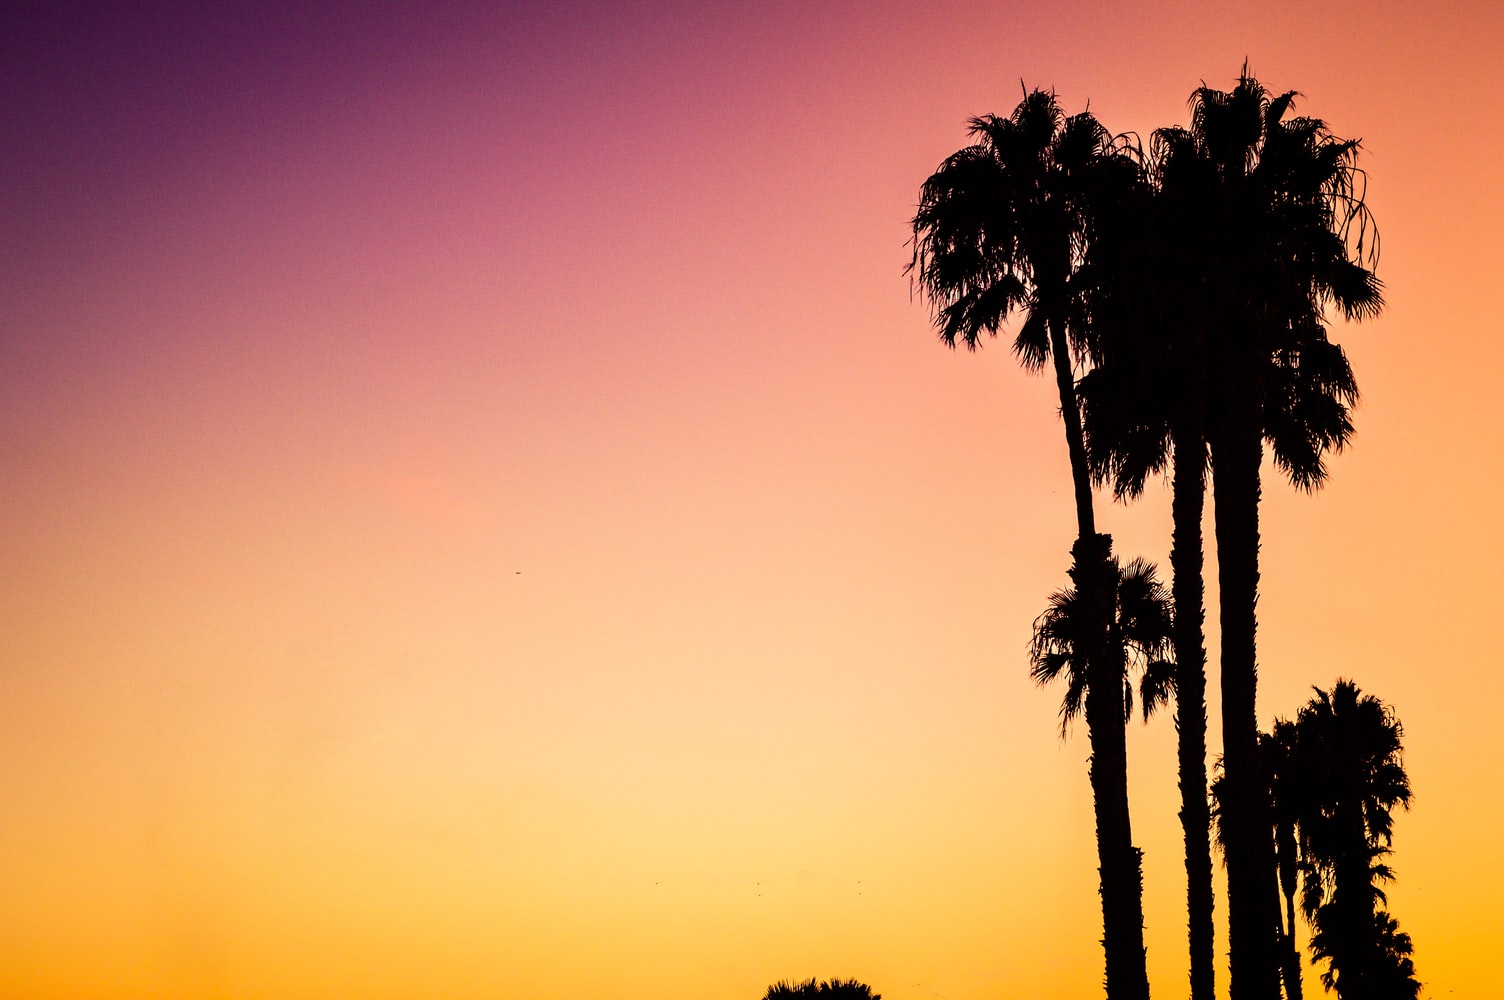 Where to Find the Best Sunset Views in Los Angeles